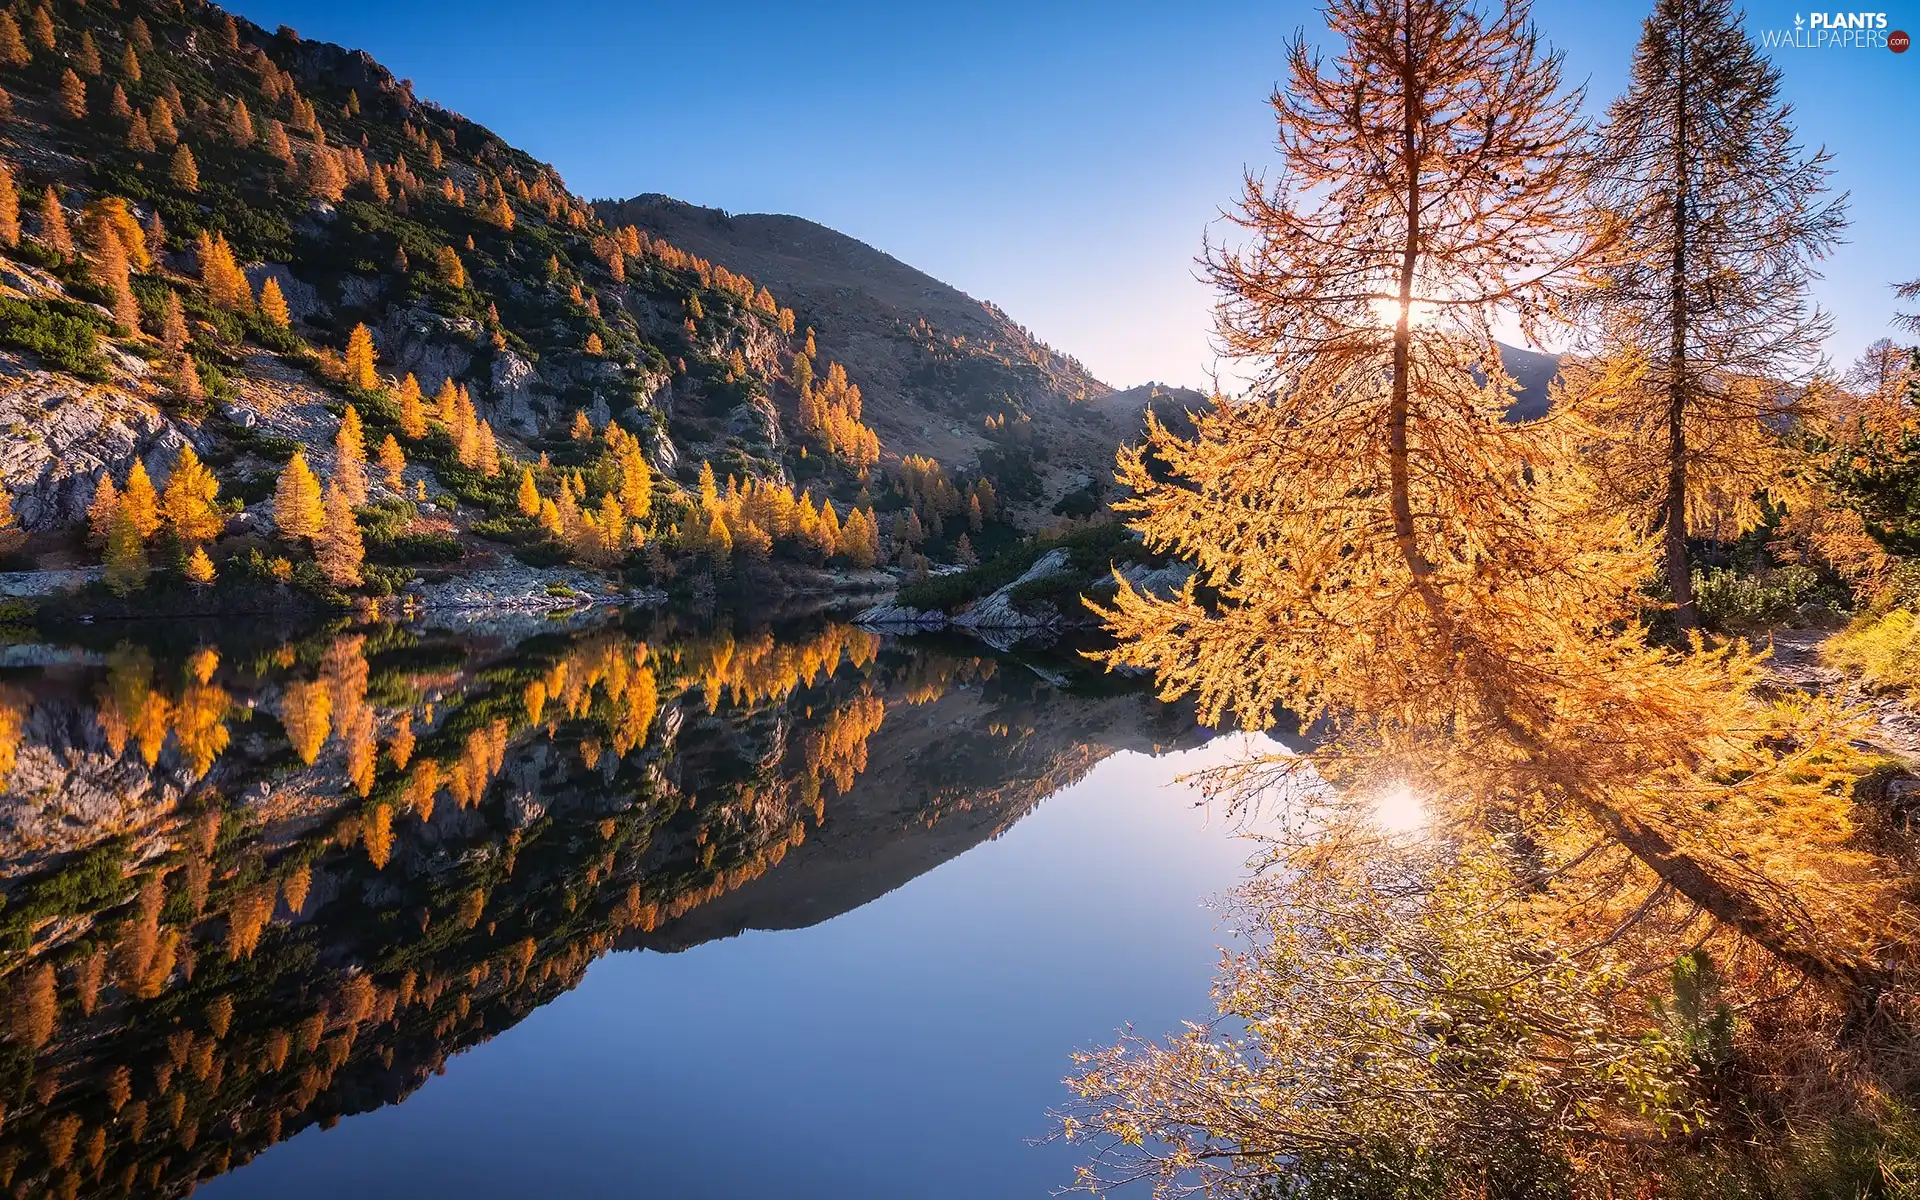 Lombardy, Italy, Mountains, lake, autumn, reflection, viewes, Larches, trees